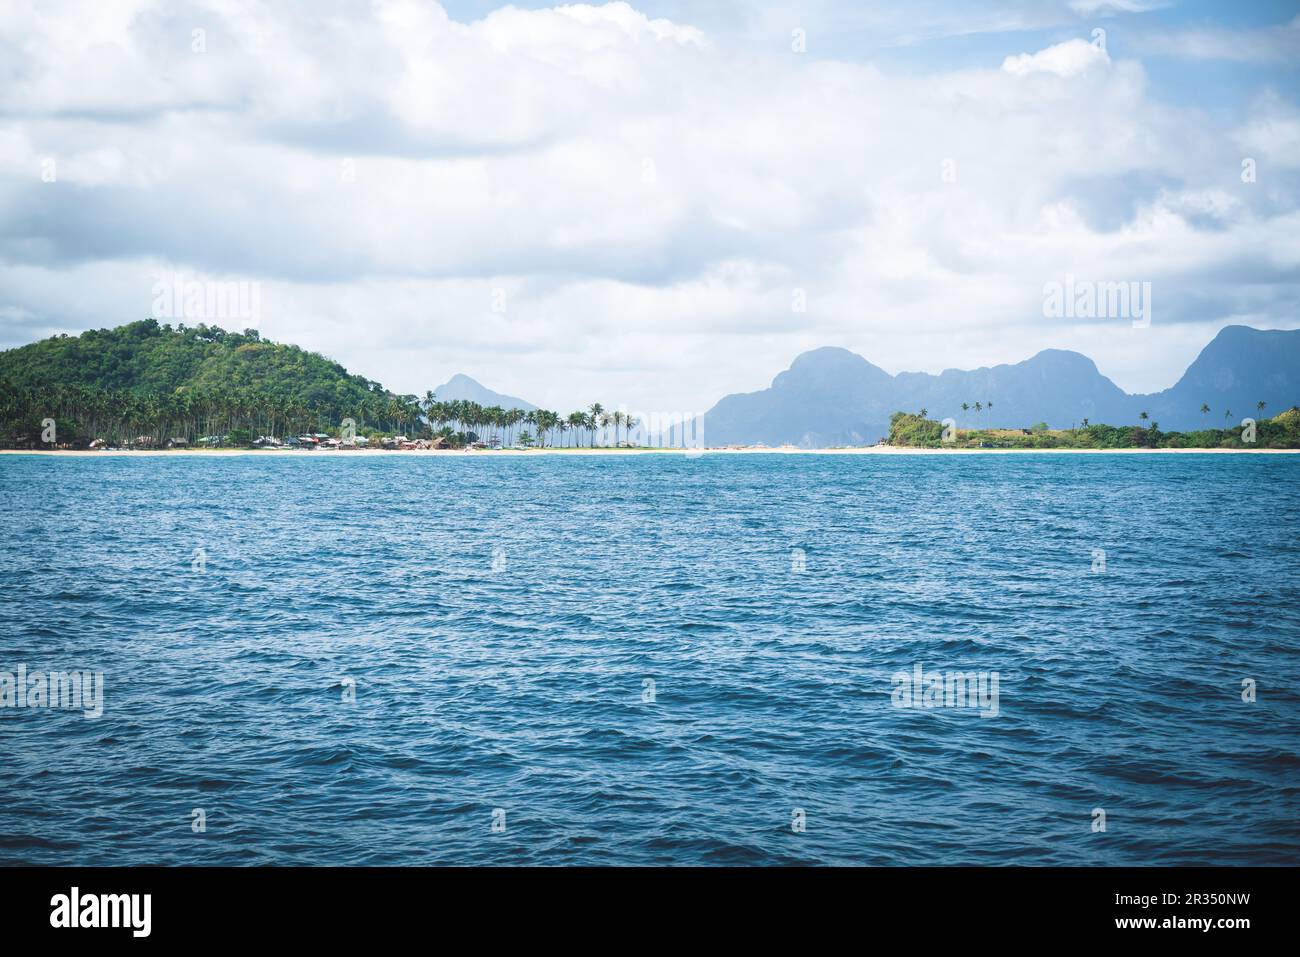 Blue ocean and village at white sand beach with palm trees along karst mountains of El Nido bay, Palawan, Philippines Stock Photo